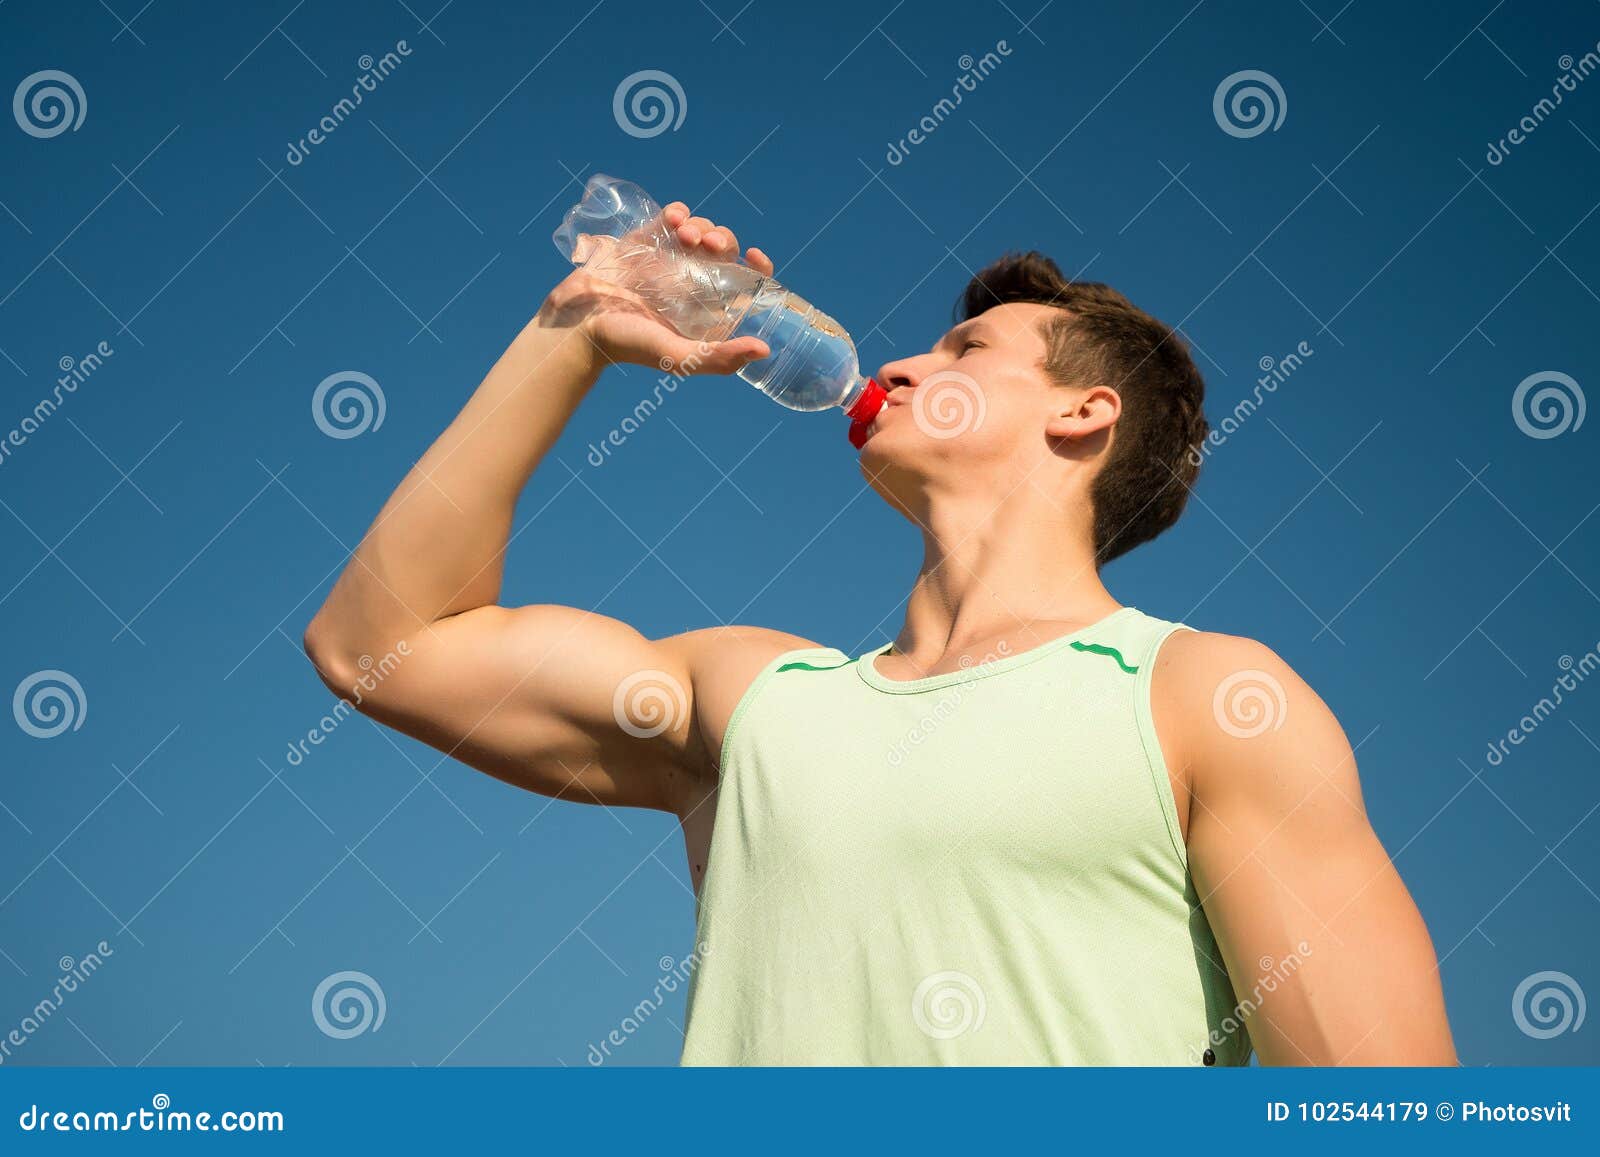 Man Drinking Water from Bottle on Sunny Day Stock Image - Image of ...